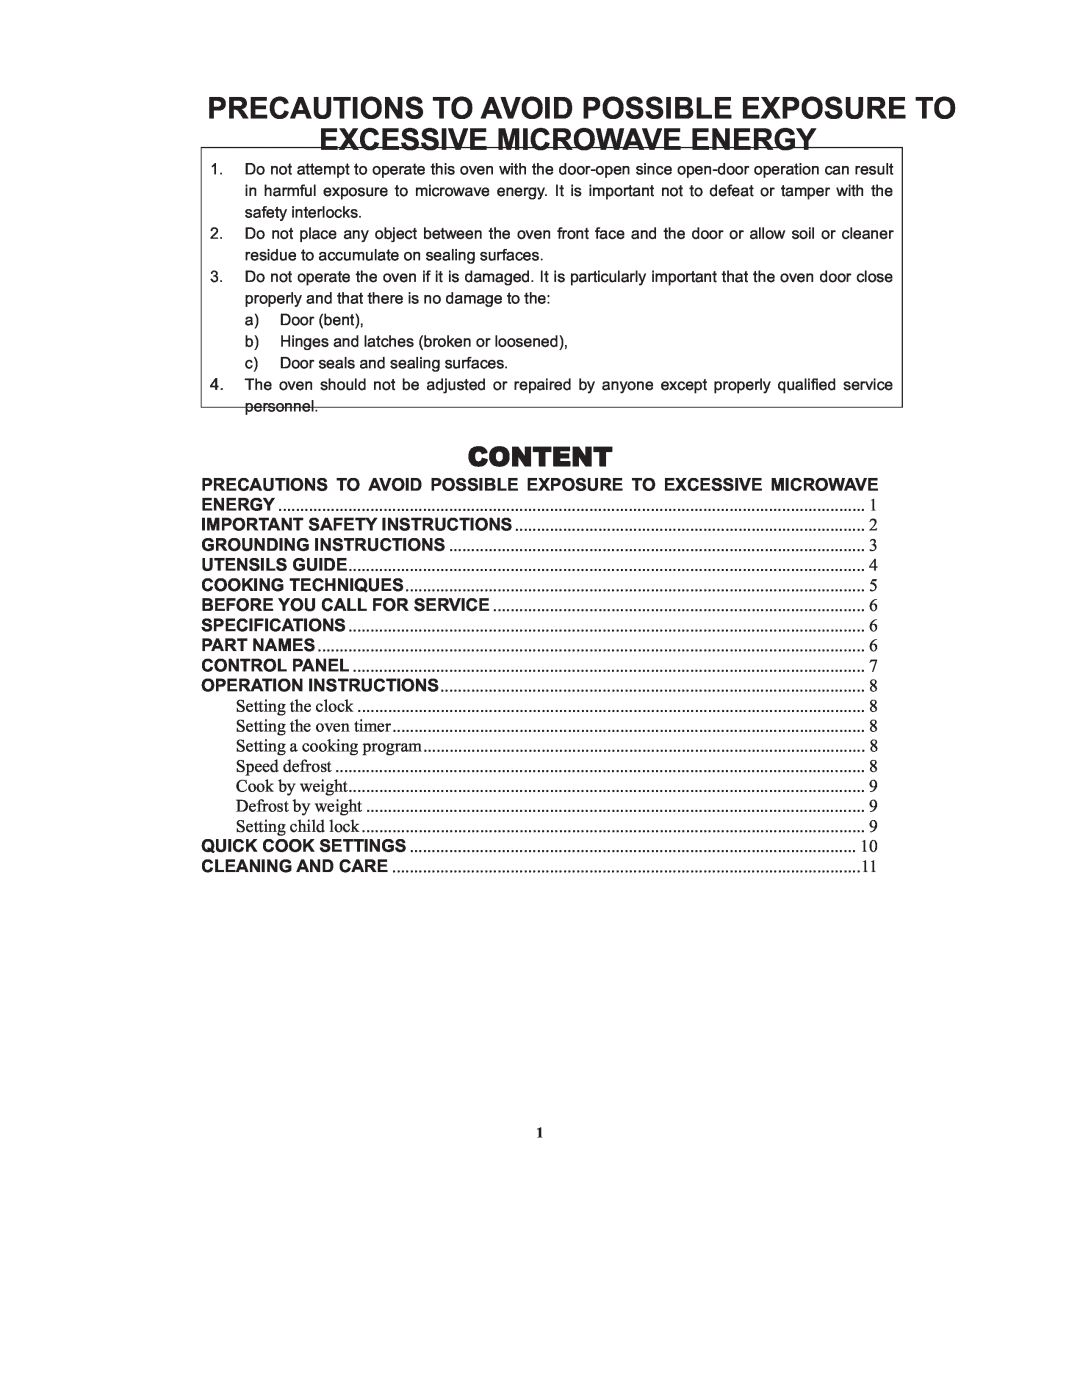 RCA RMW743 warranty Content, Precautions To Avoid Possible Exposure To, Excessive Microwave Energy 